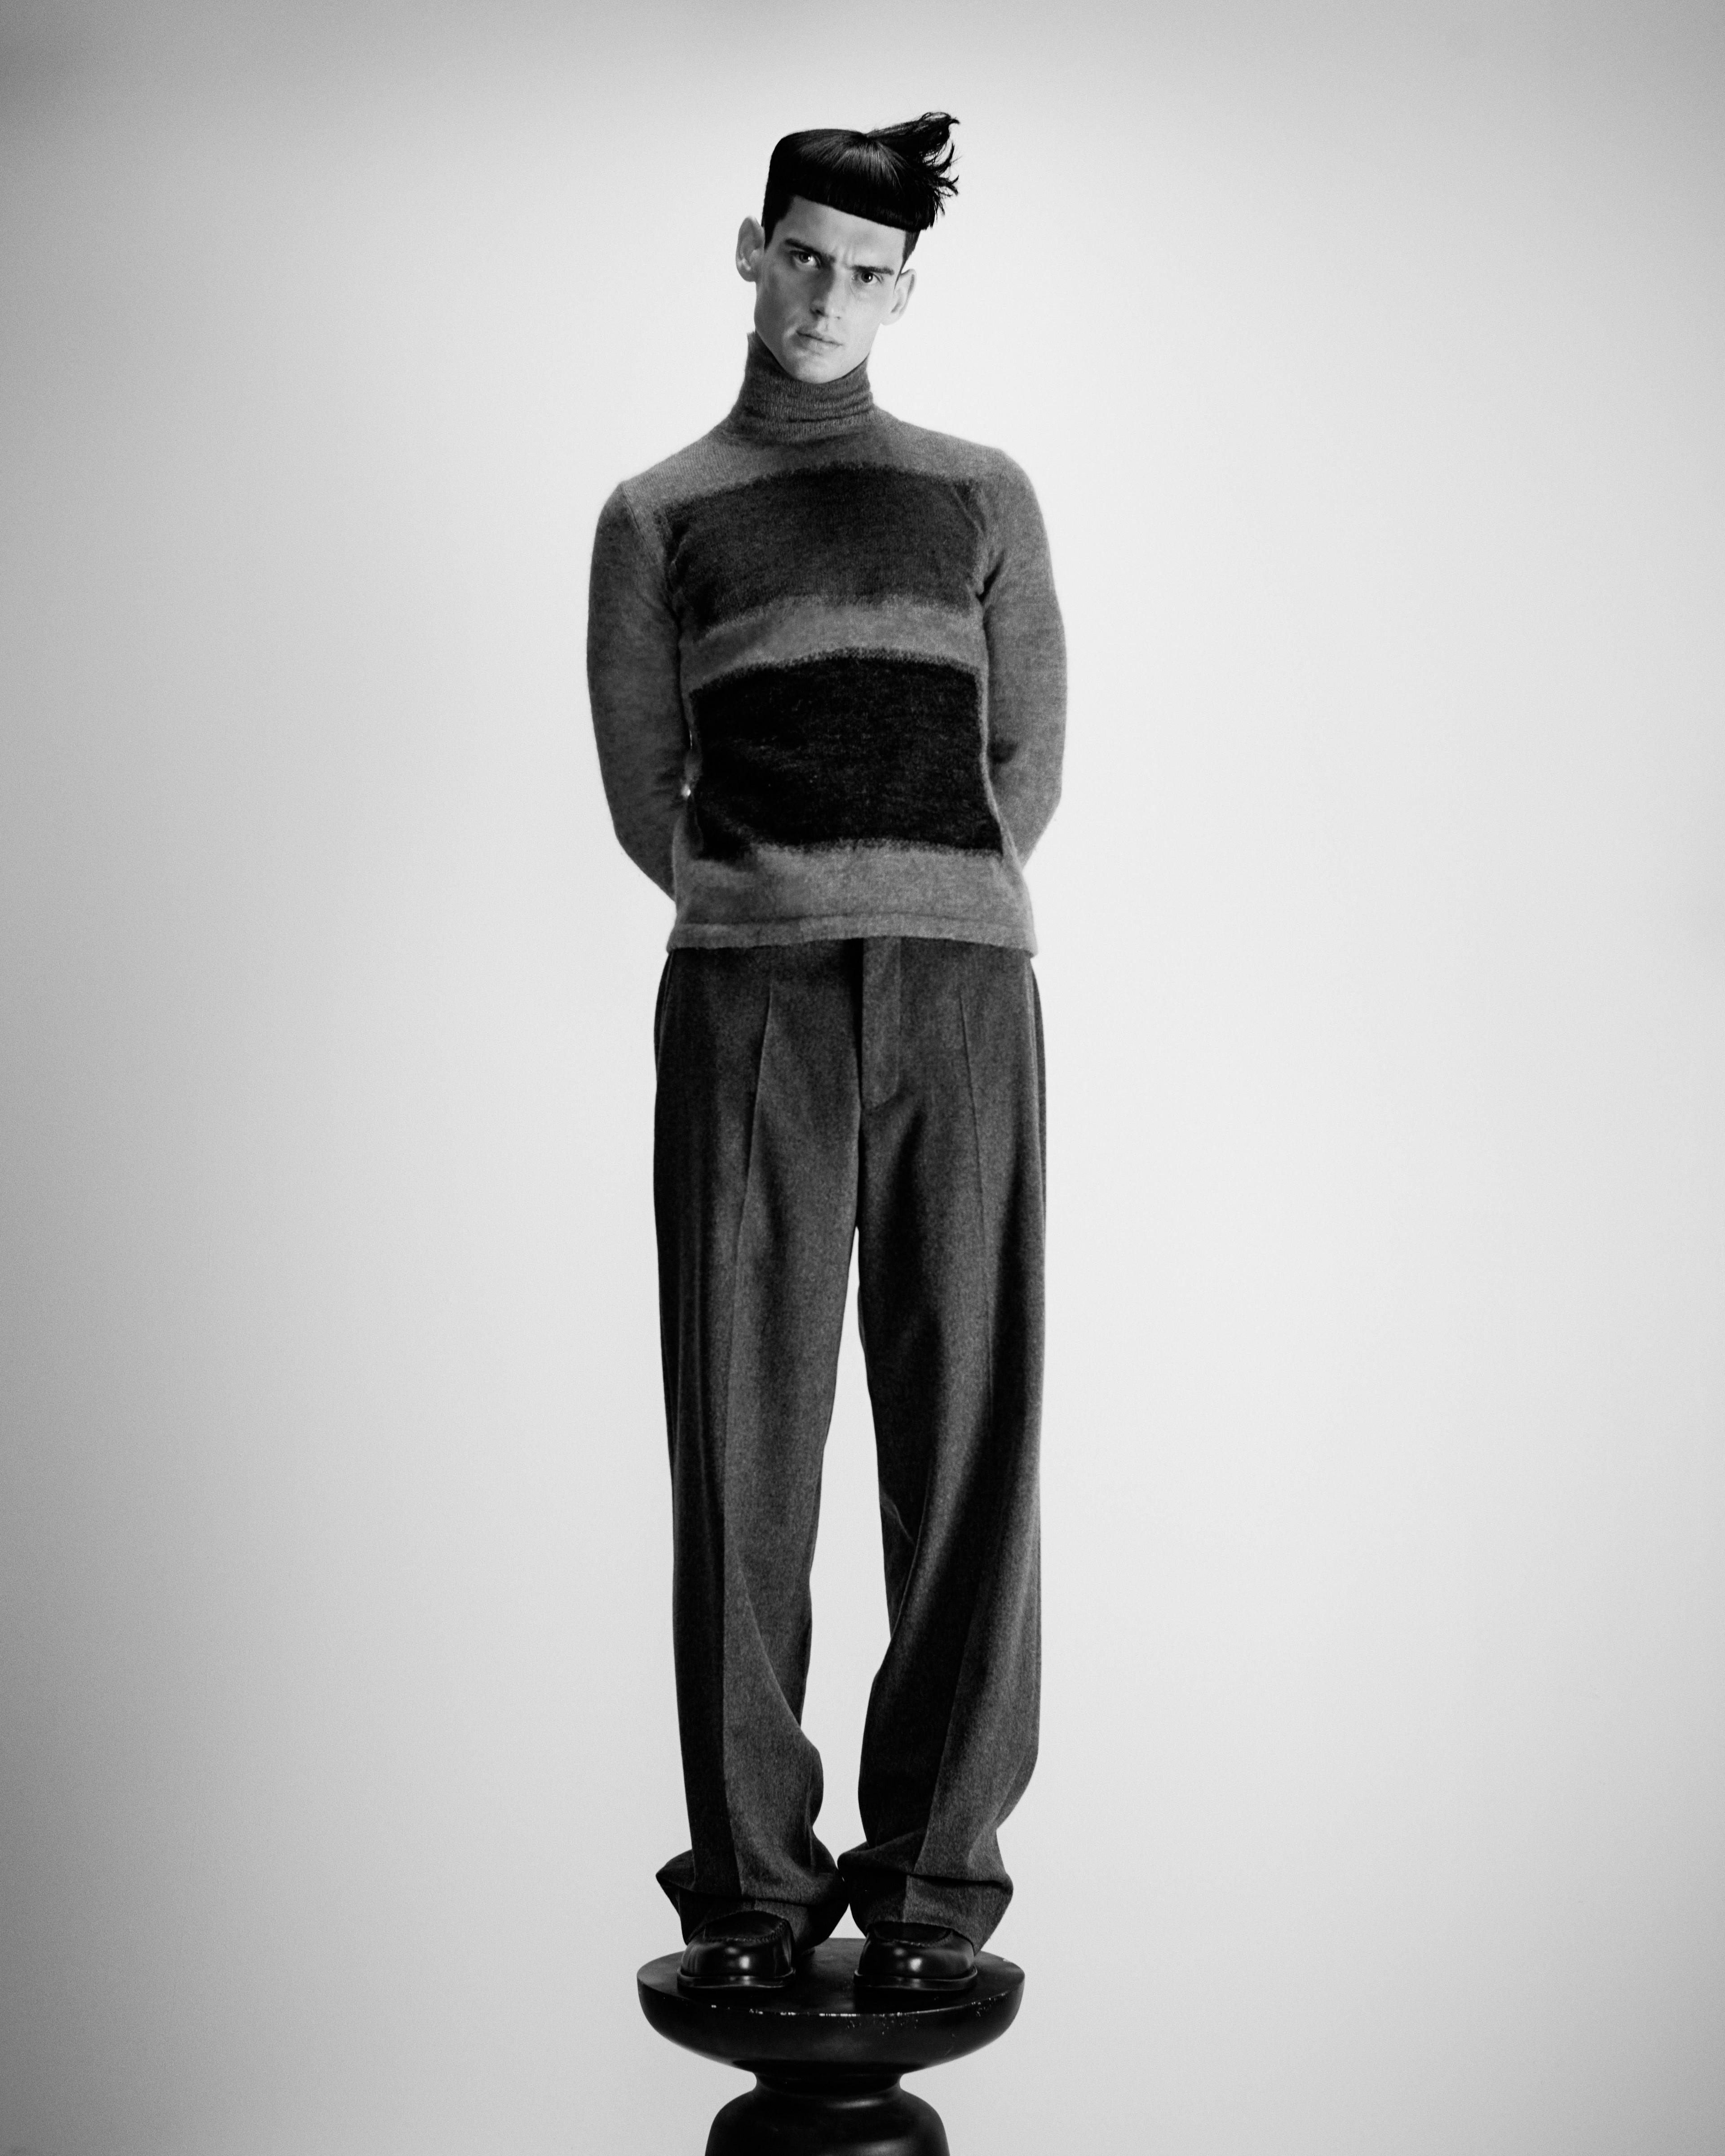 Vintage sweater by Raf Simons from Artifact. Pants and shoes by Officine Générale.